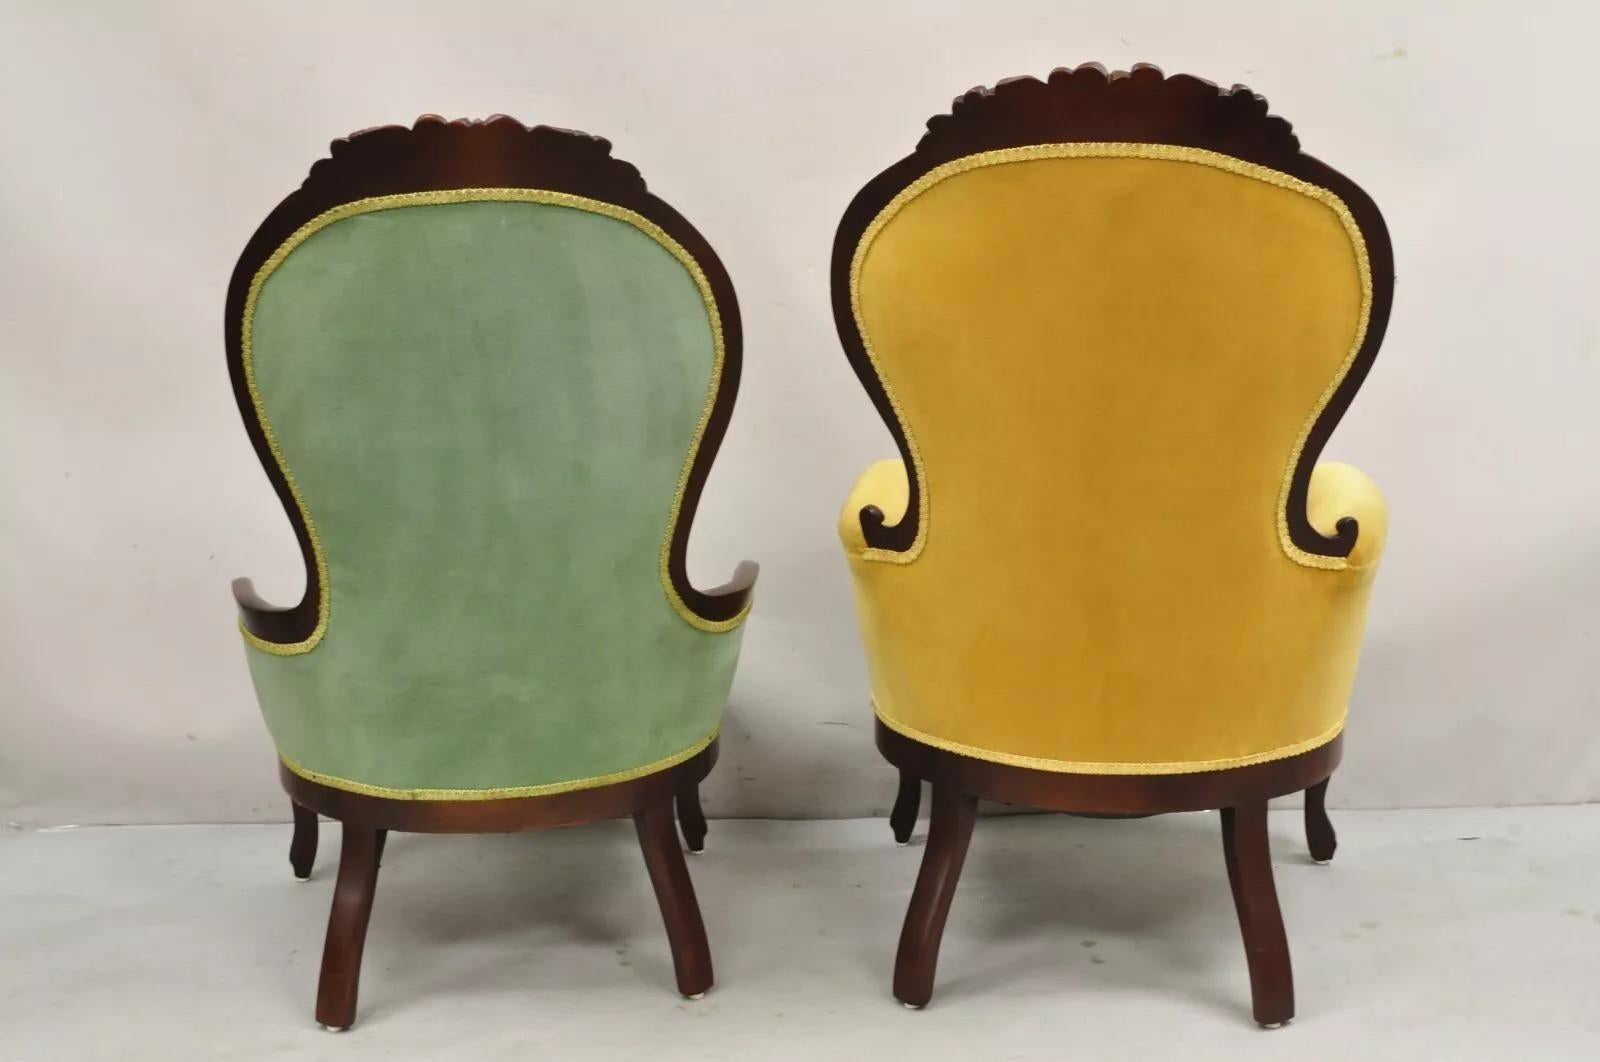 Vintage Victorian Green & Yellow His & Hers Rose Carved Parlor Chairs - a Pair For Sale 5